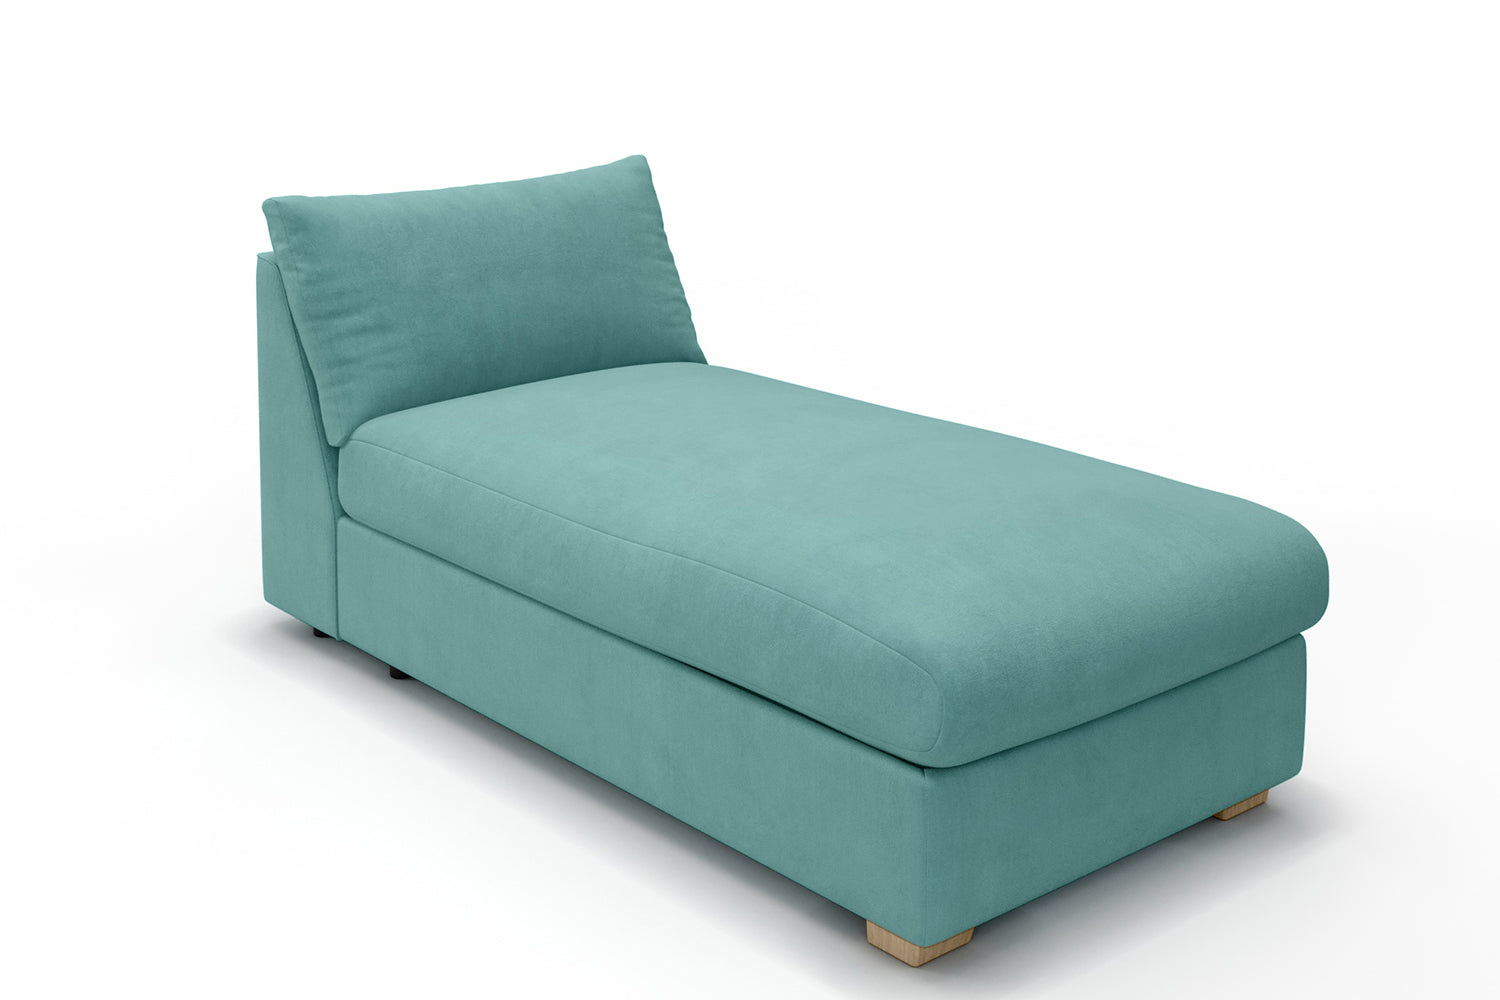 SNUG | The Small Biggie Chaise Longue in Soft Teal